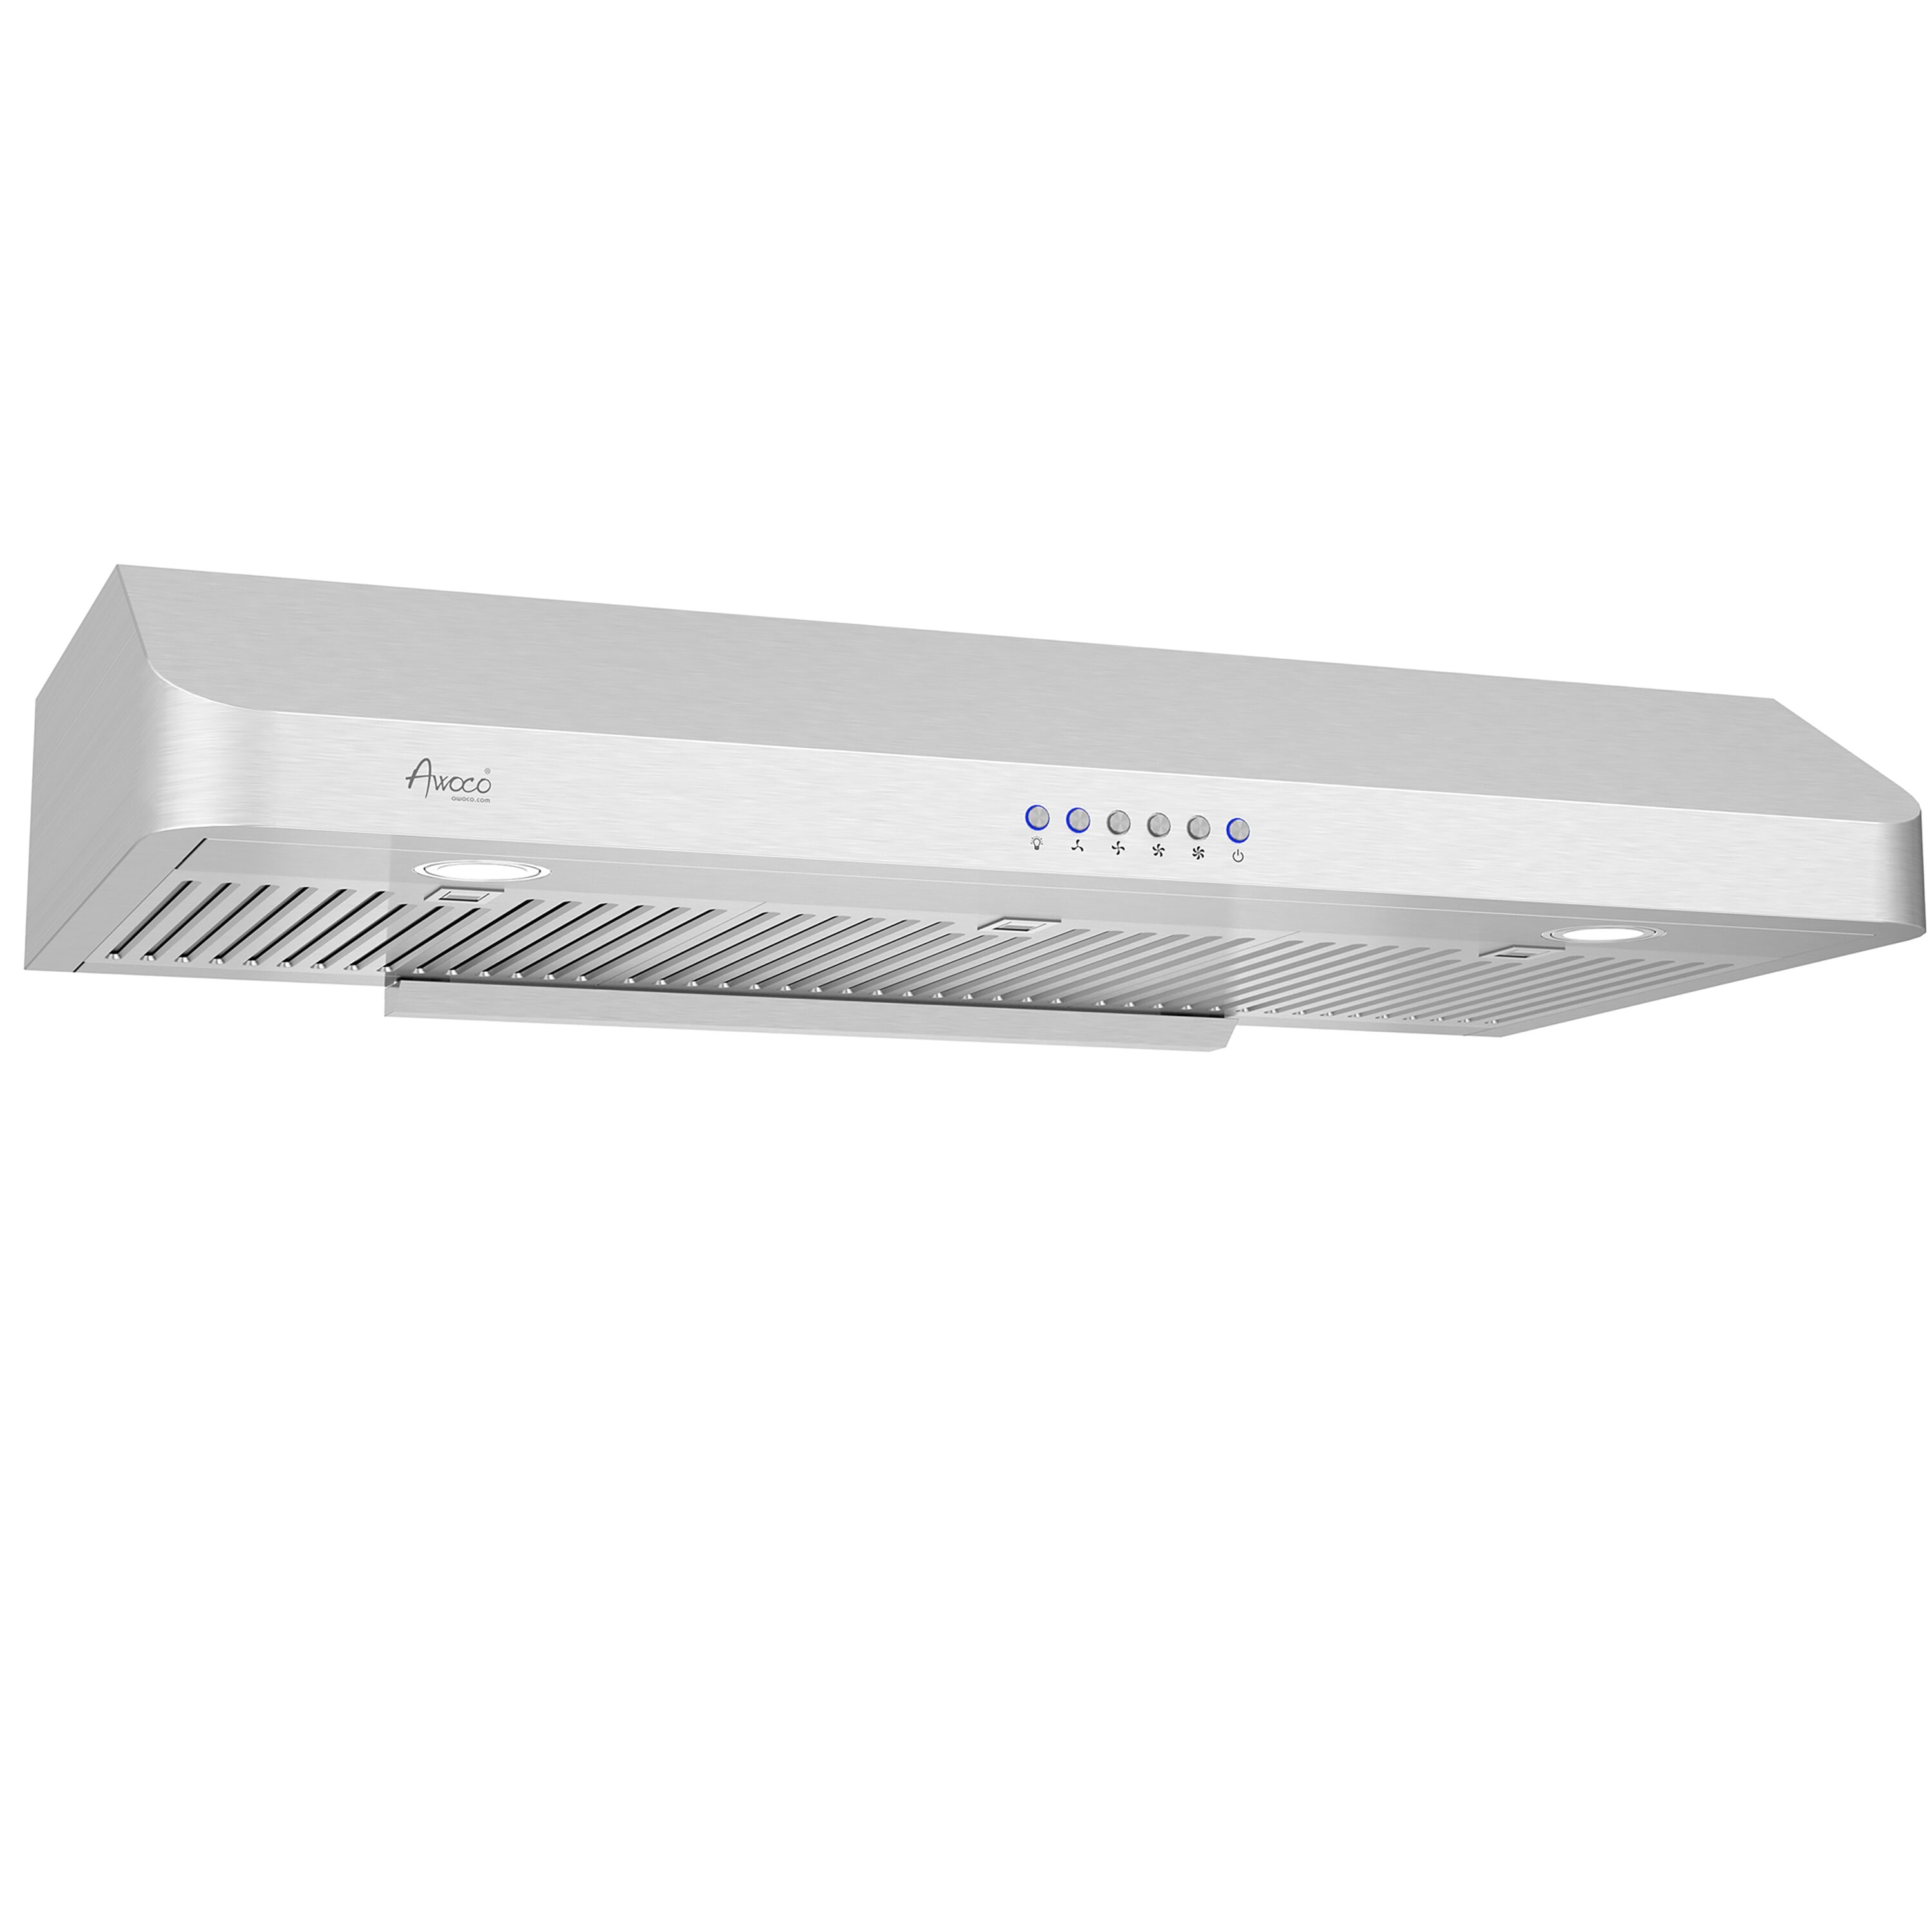 DISCONTINUED** Broan® Spire 42-Inch Convertible Under-Cabinet Range Hood,  450 Max Blower CFM, Stainless Steel